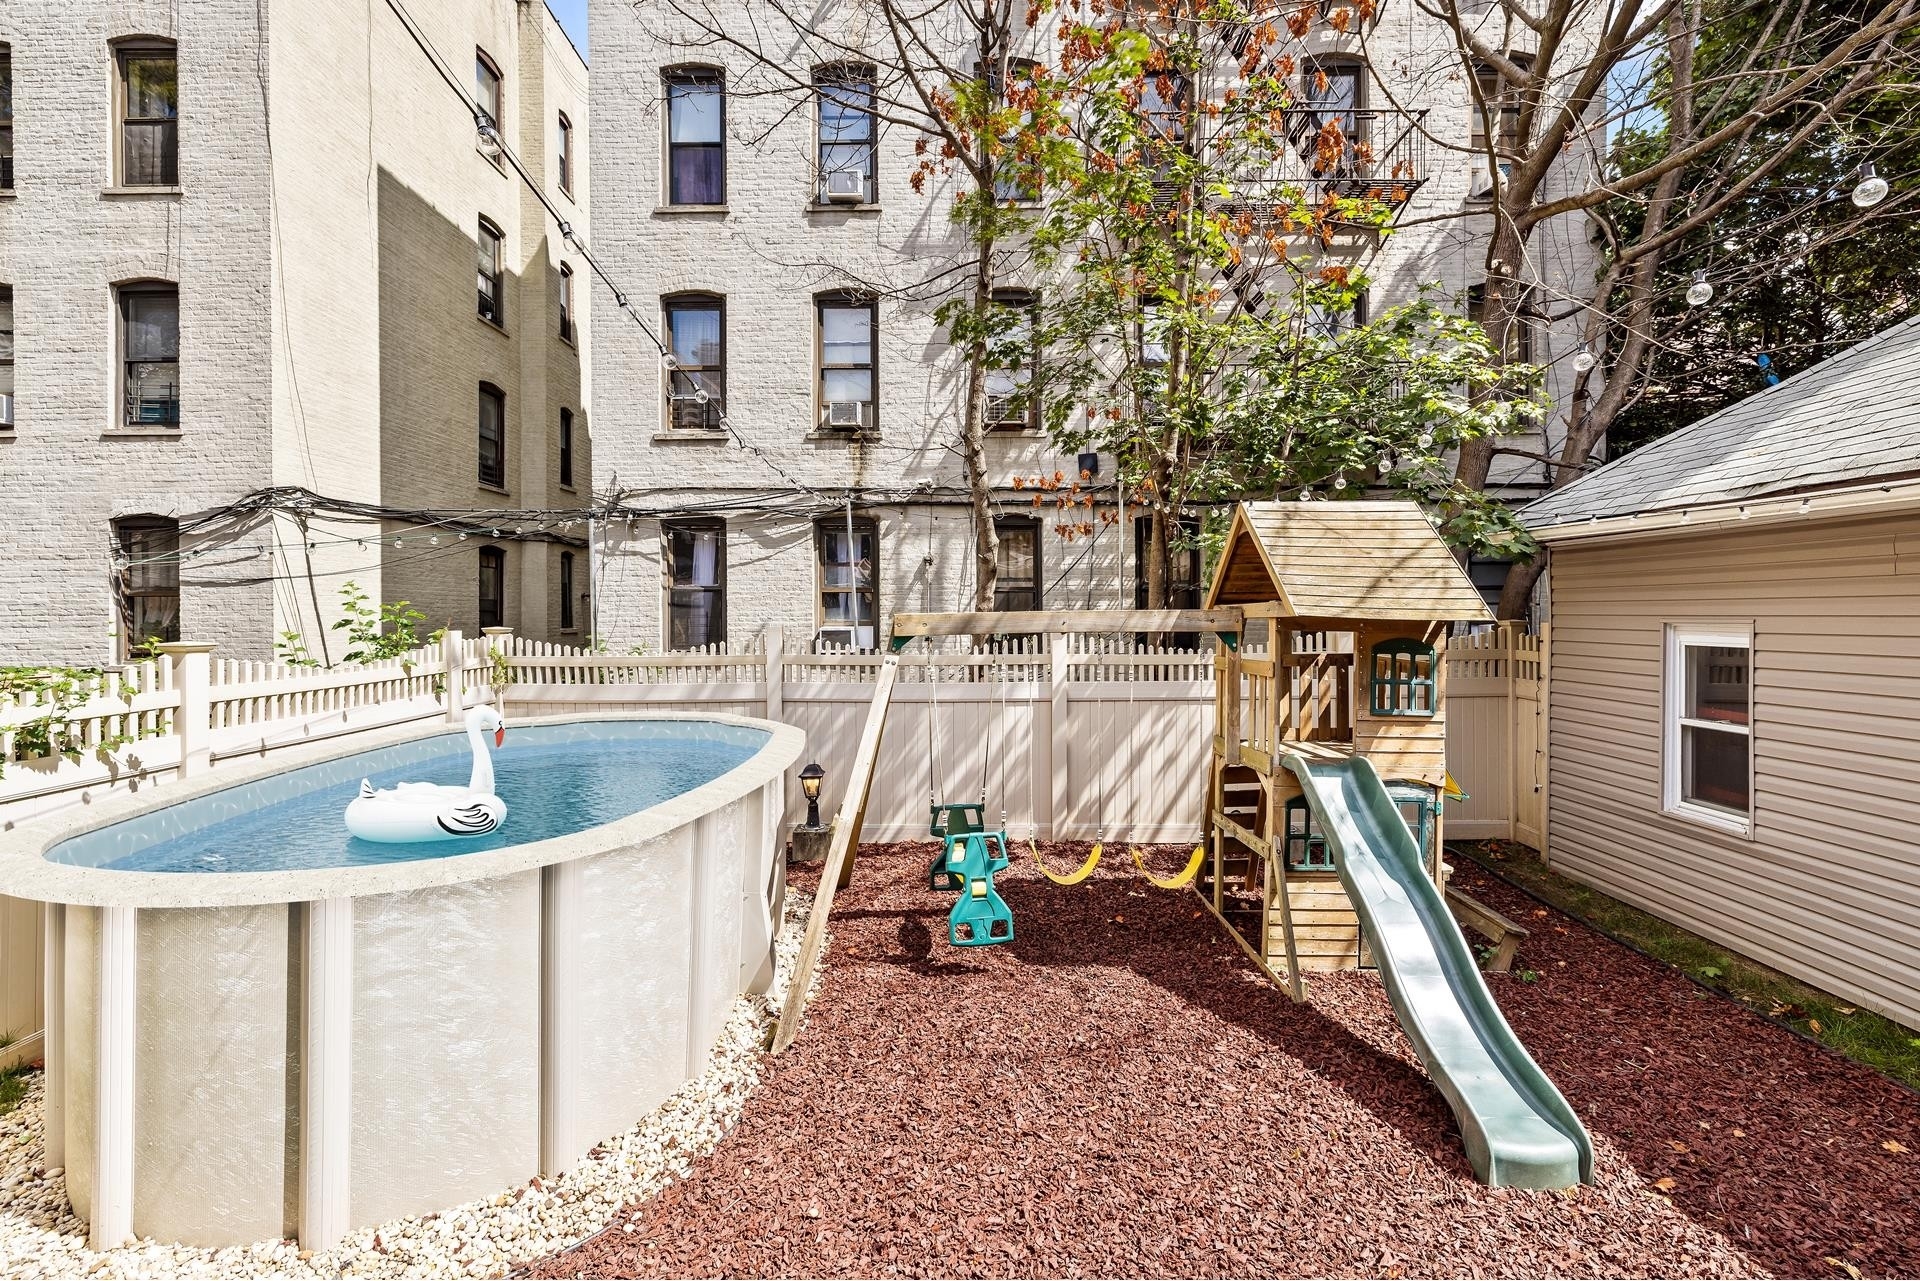 31. Single Family Townhouse for Sale at 625 E 24TH ST, TOWNHOUSE Midwood, Brooklyn, New York 11210